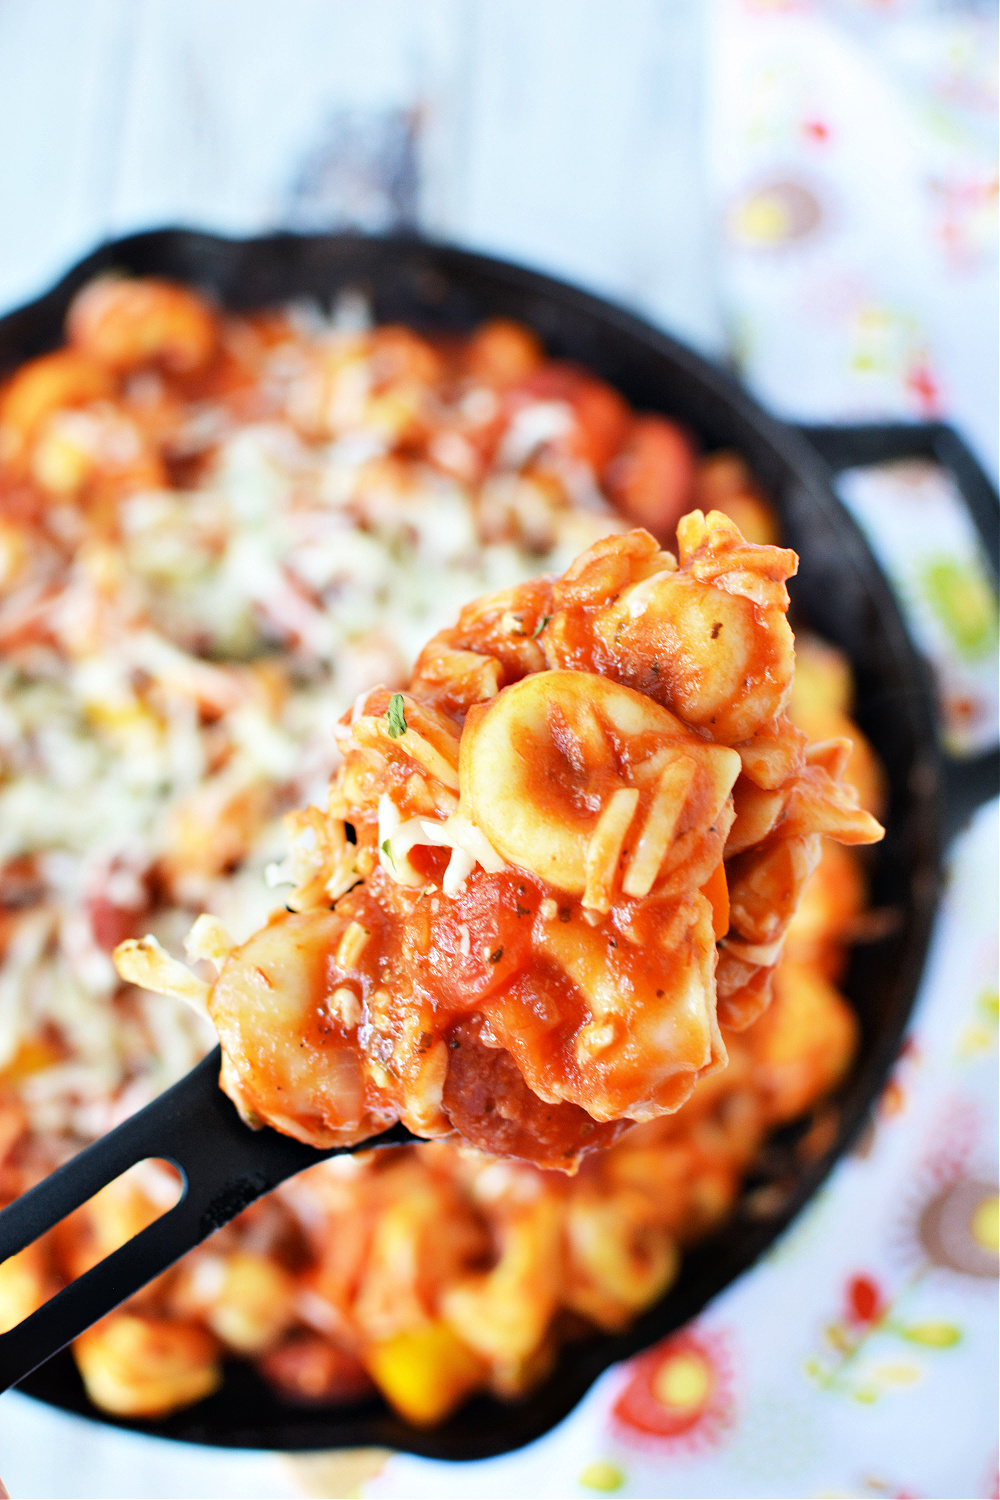 cast iron skillet filled with tomato sauce, tortellini pasta and covered in melted cheese